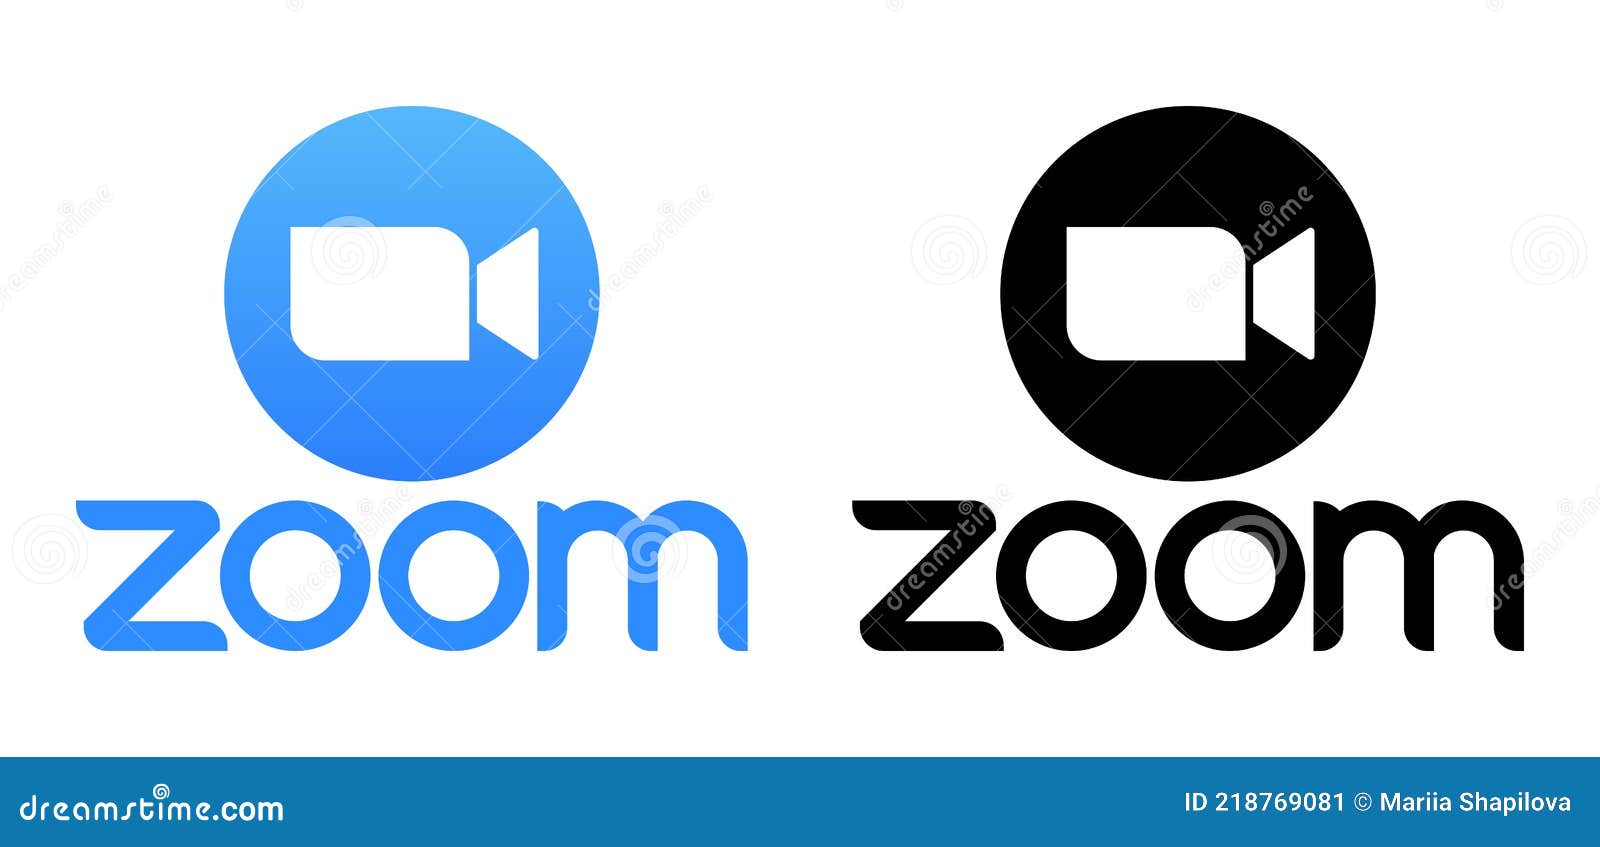 Zoom App Logo in Black and Blue Color Editorial Photo - Illustration ...